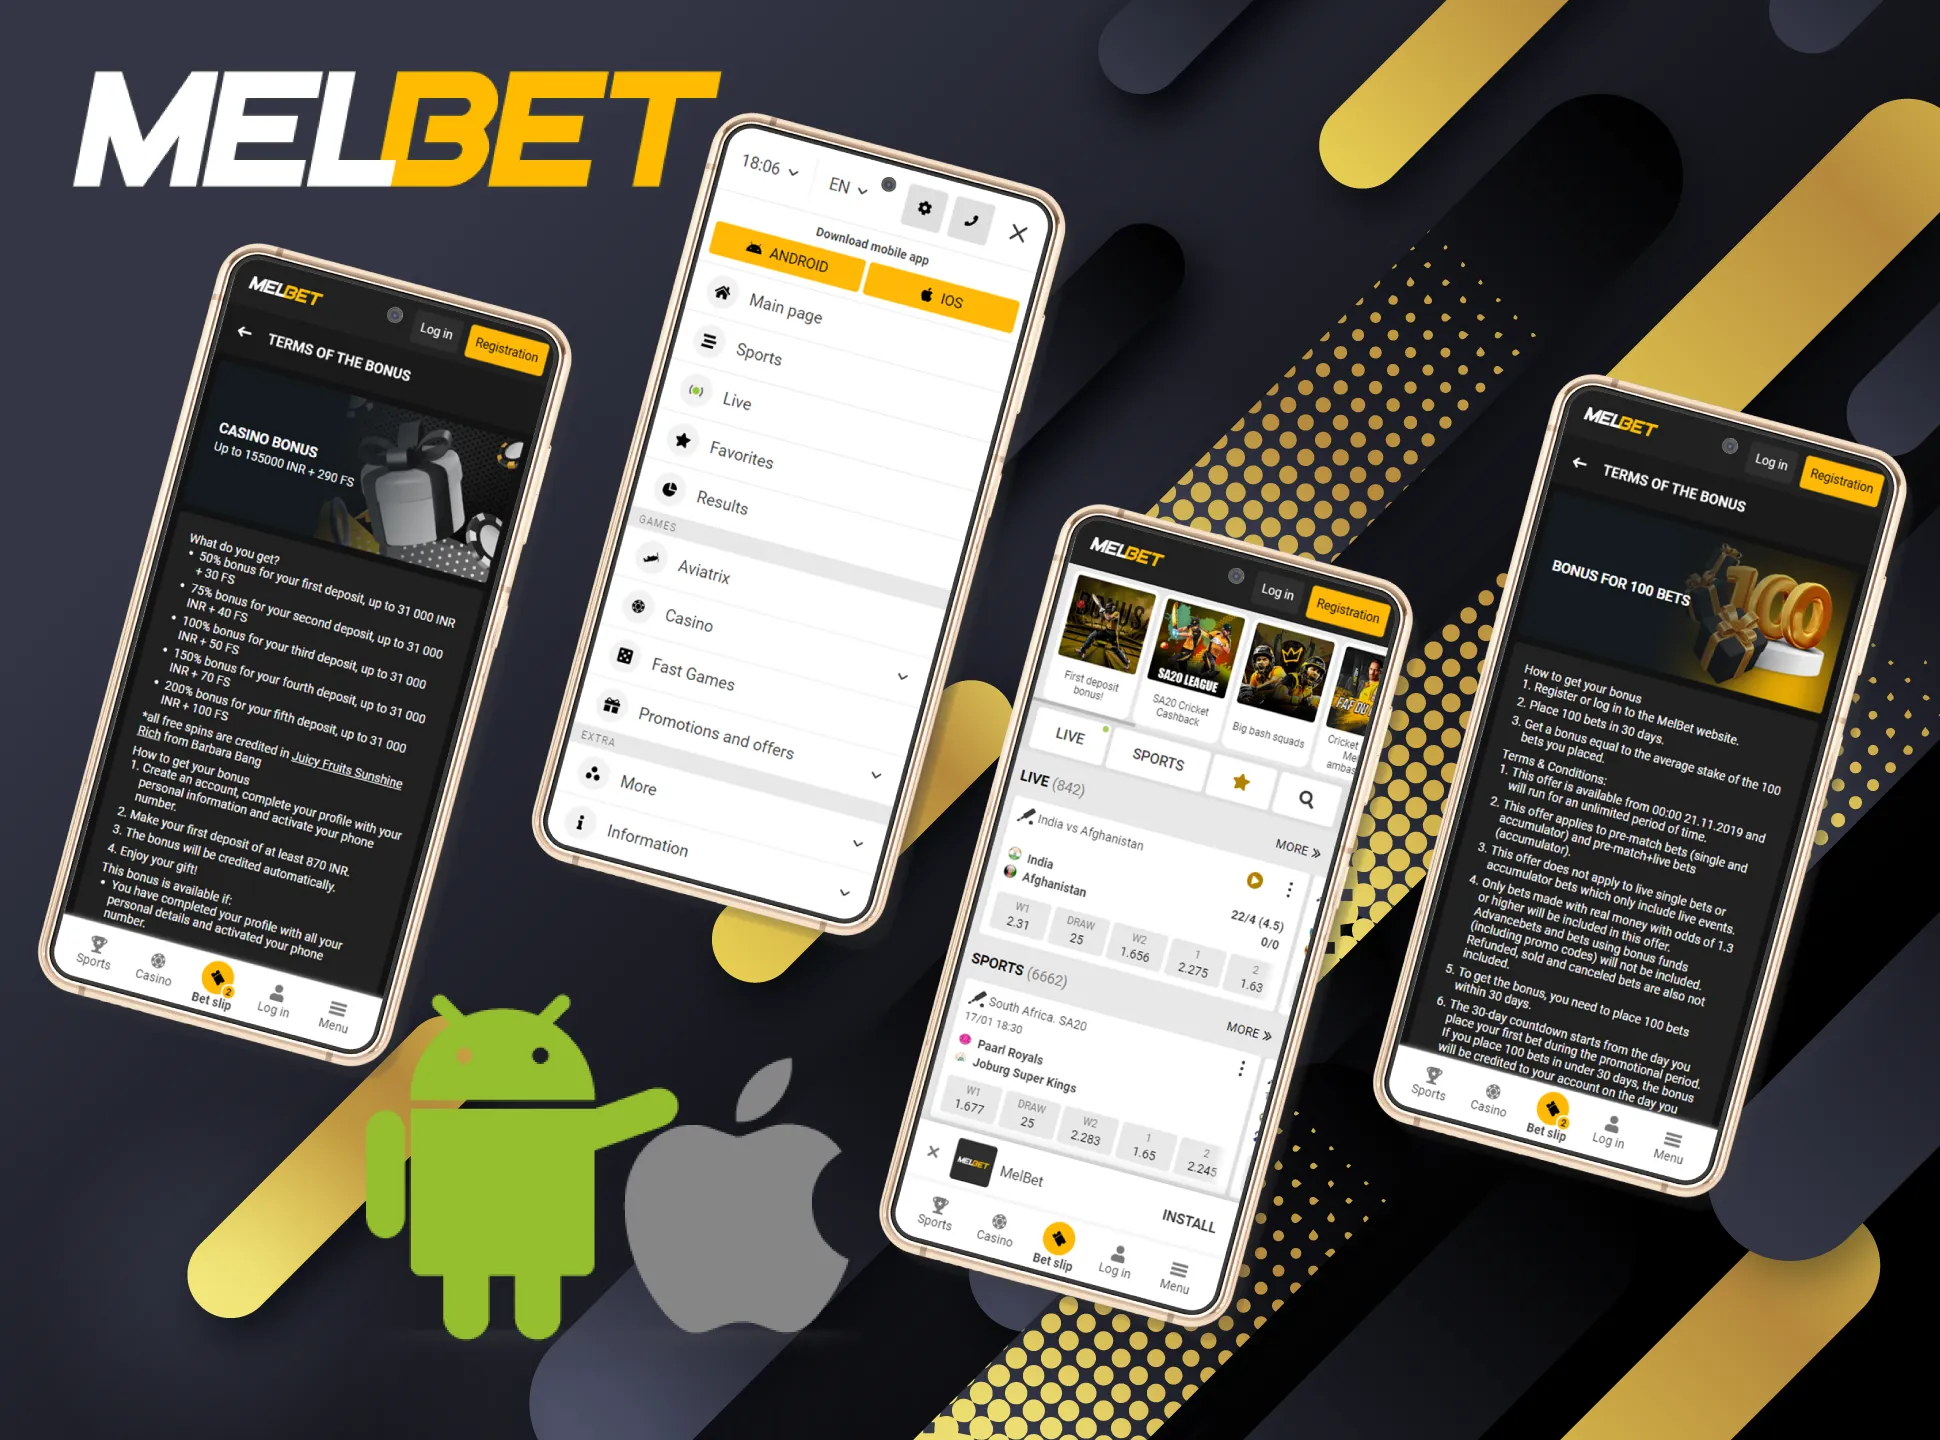 Almost each Android device can install the Melbet app.